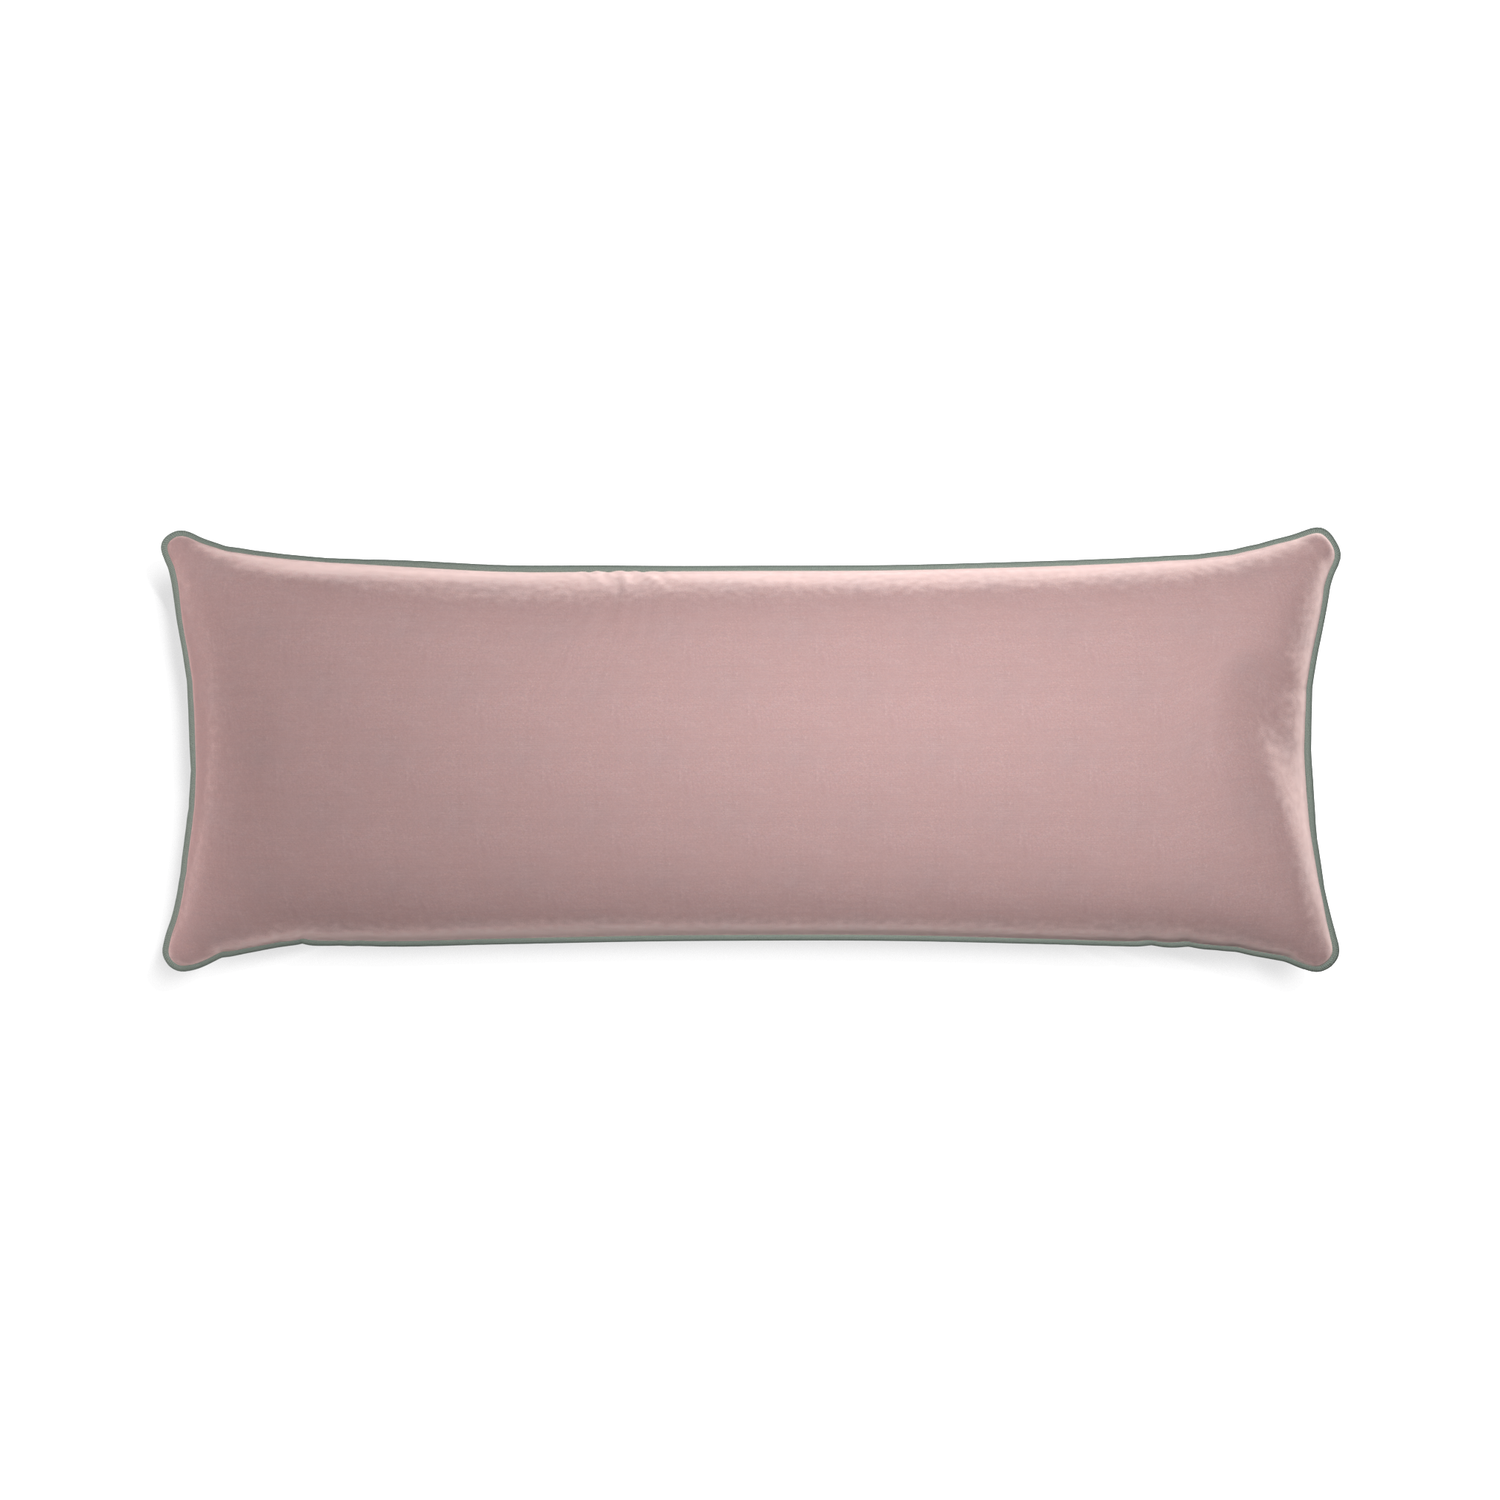 Xl-lumbar mauve velvet custom mauvepillow with sage piping on white background